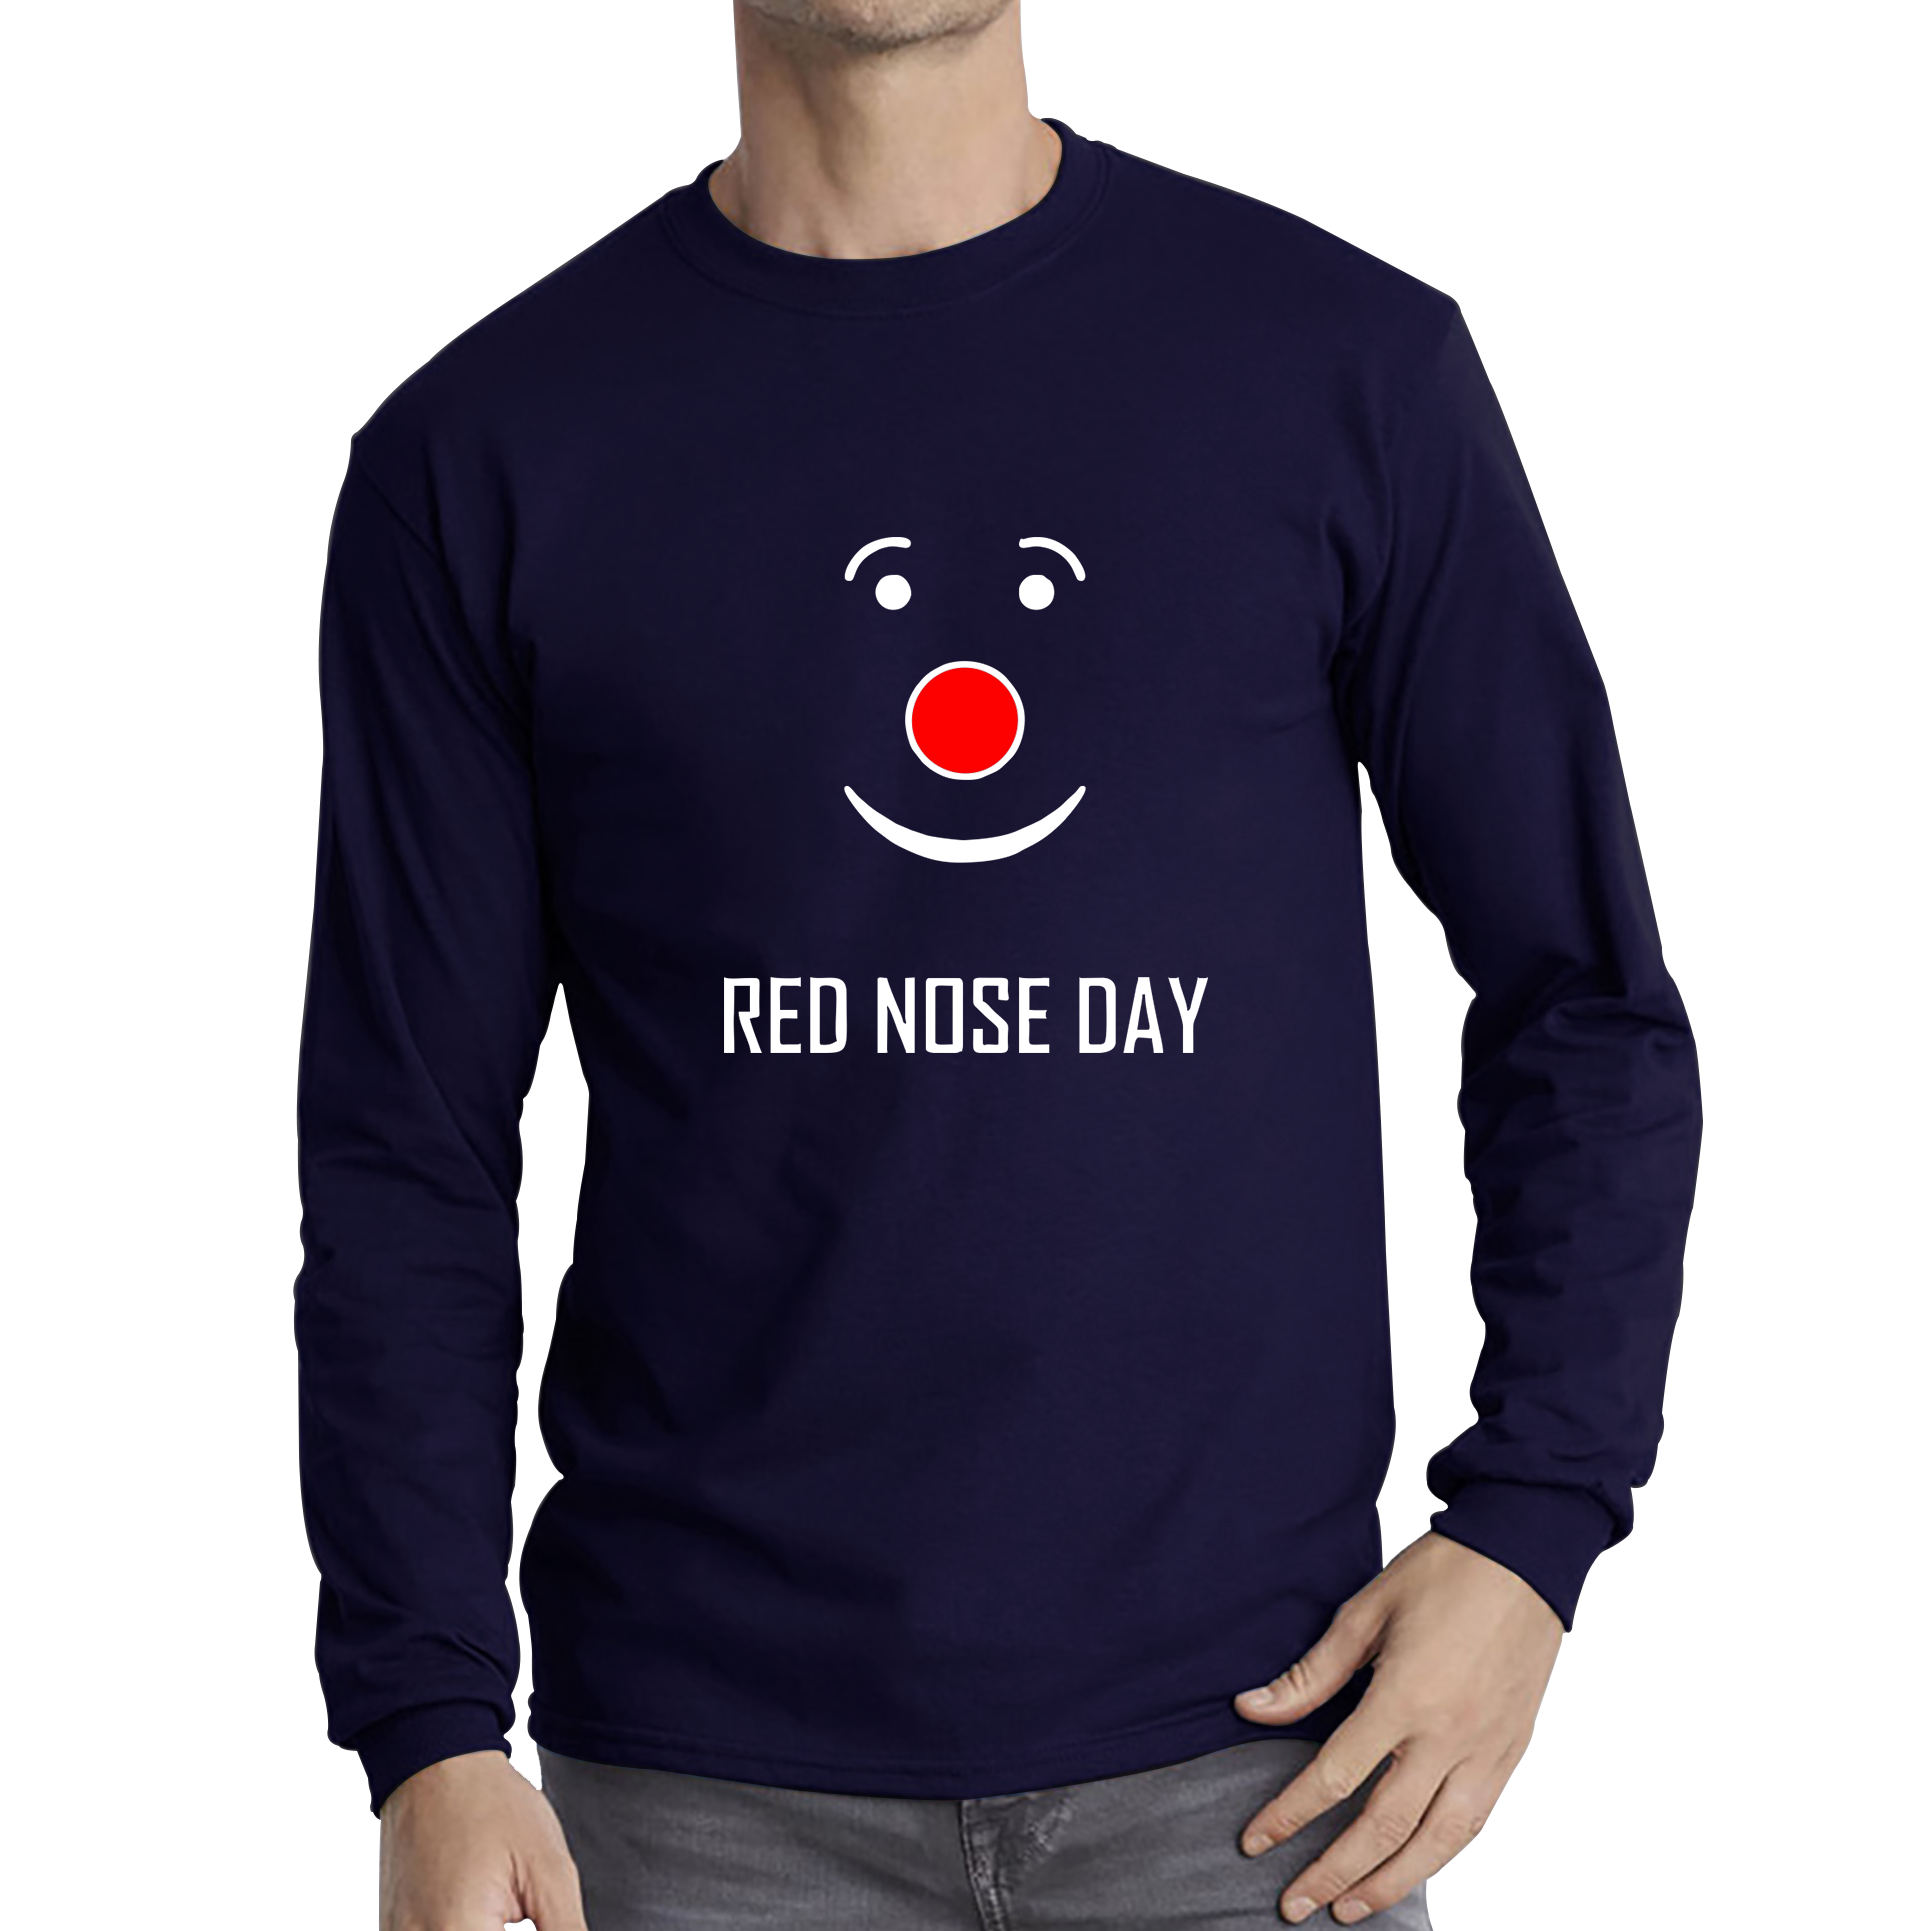 Red Nose Clown Nose Day Adult Long Sleeve T Shirt. 50% Goes To Charity